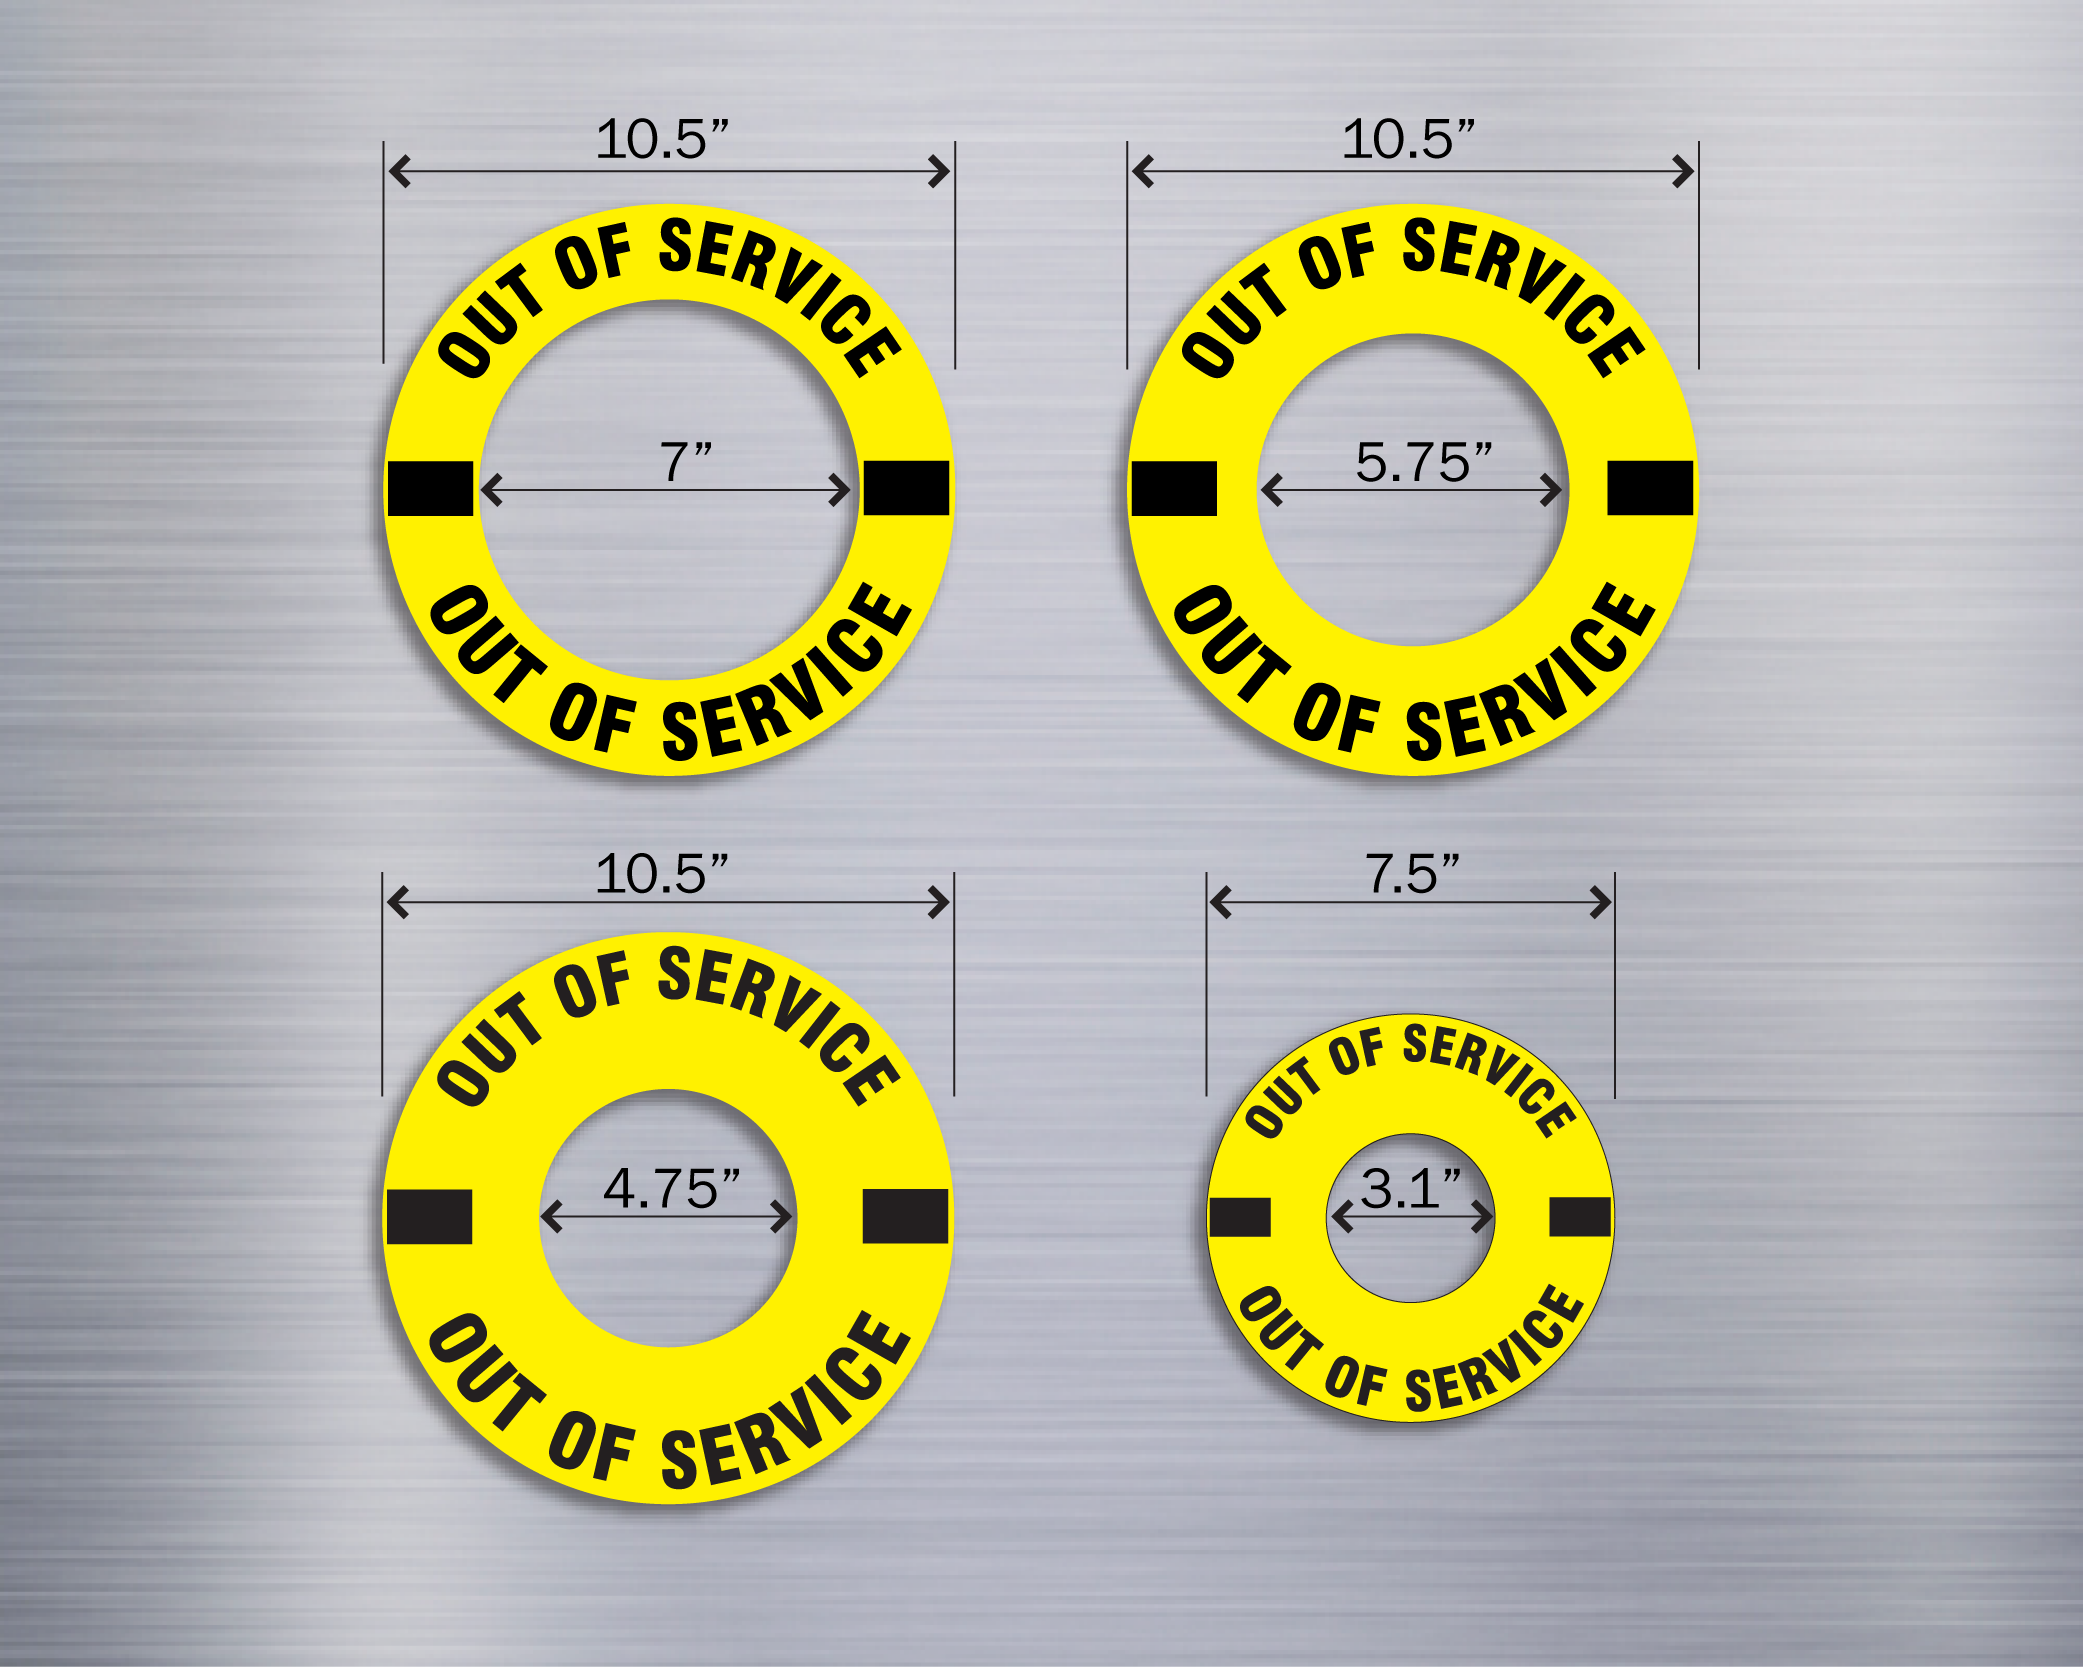 A dimensioned diagram of four circular fire hydrant rings in different sizes. Rings are Yellow with Black text to read, "Out of Service".